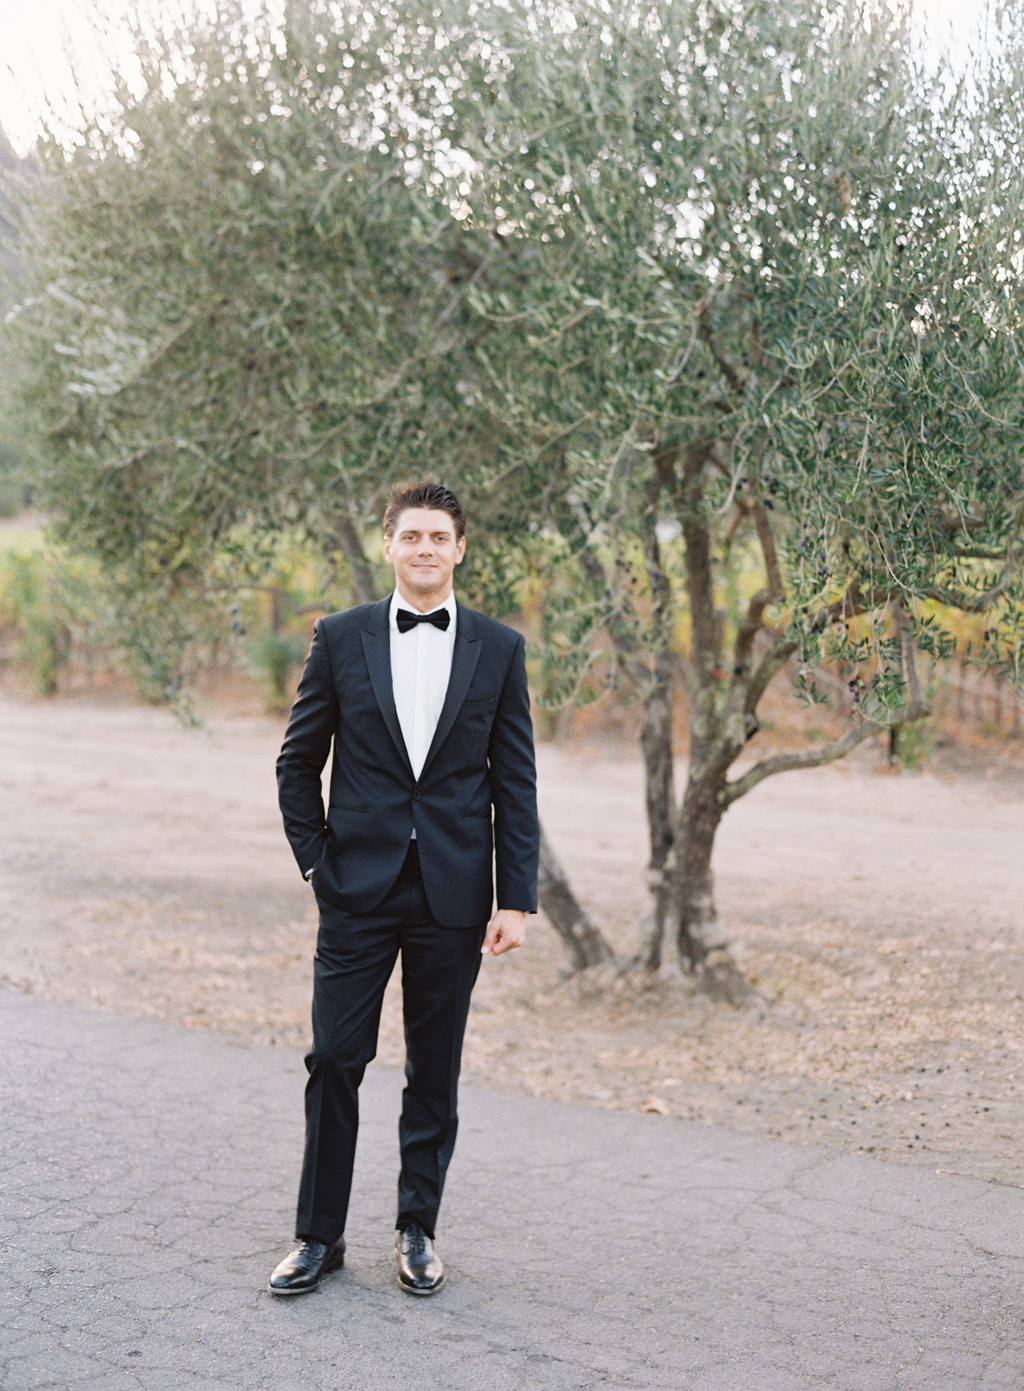 A groom poses in front of an olive tree in napa valley, california, on his wedding day. 